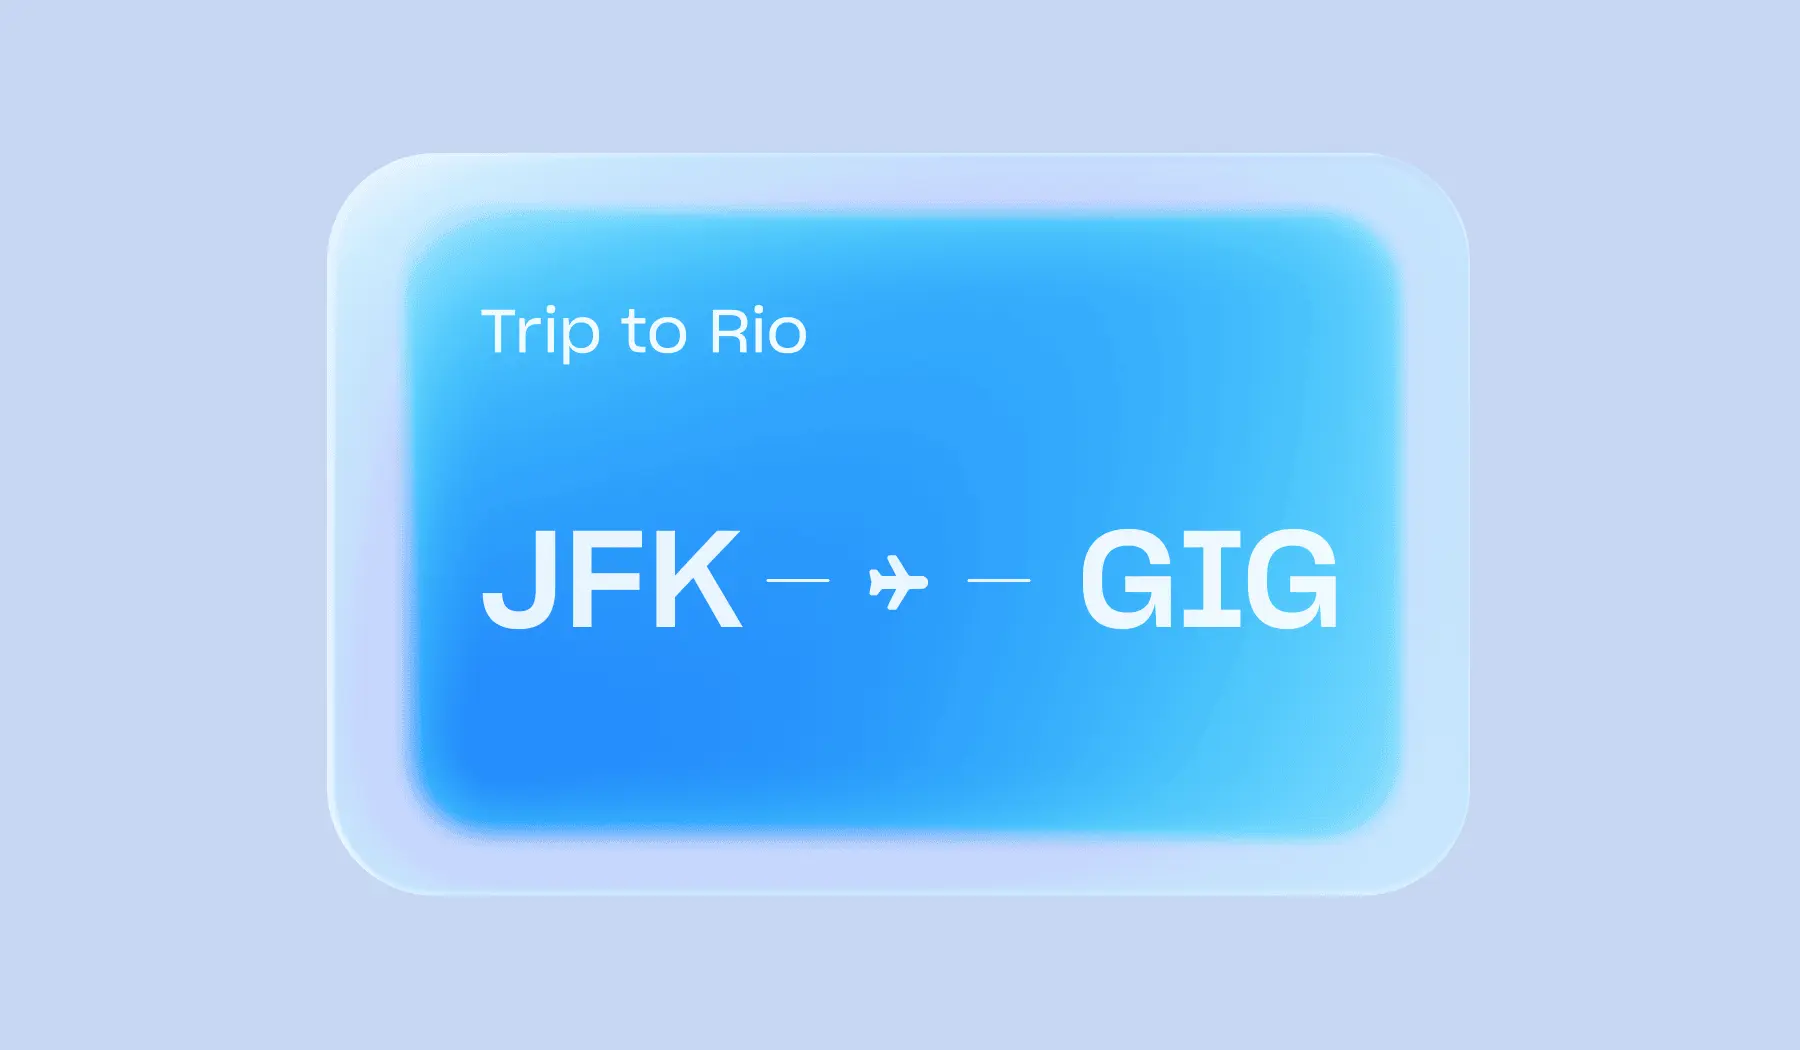 JFK to GIG Oxygen virtual card for travel